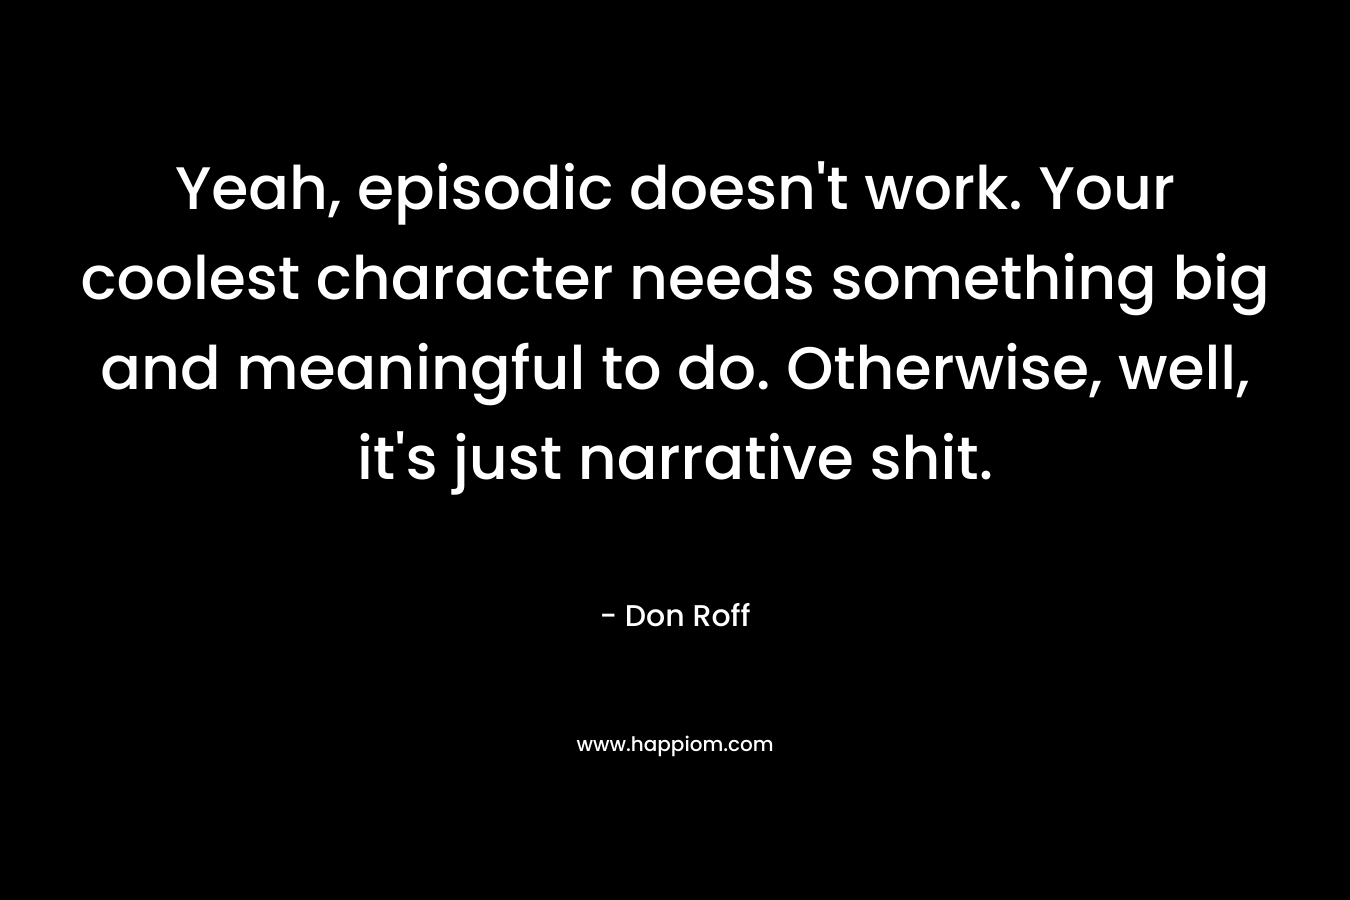 Yeah, episodic doesn't work. Your coolest character needs something big and meaningful to do. Otherwise, well, it's just narrative shit.